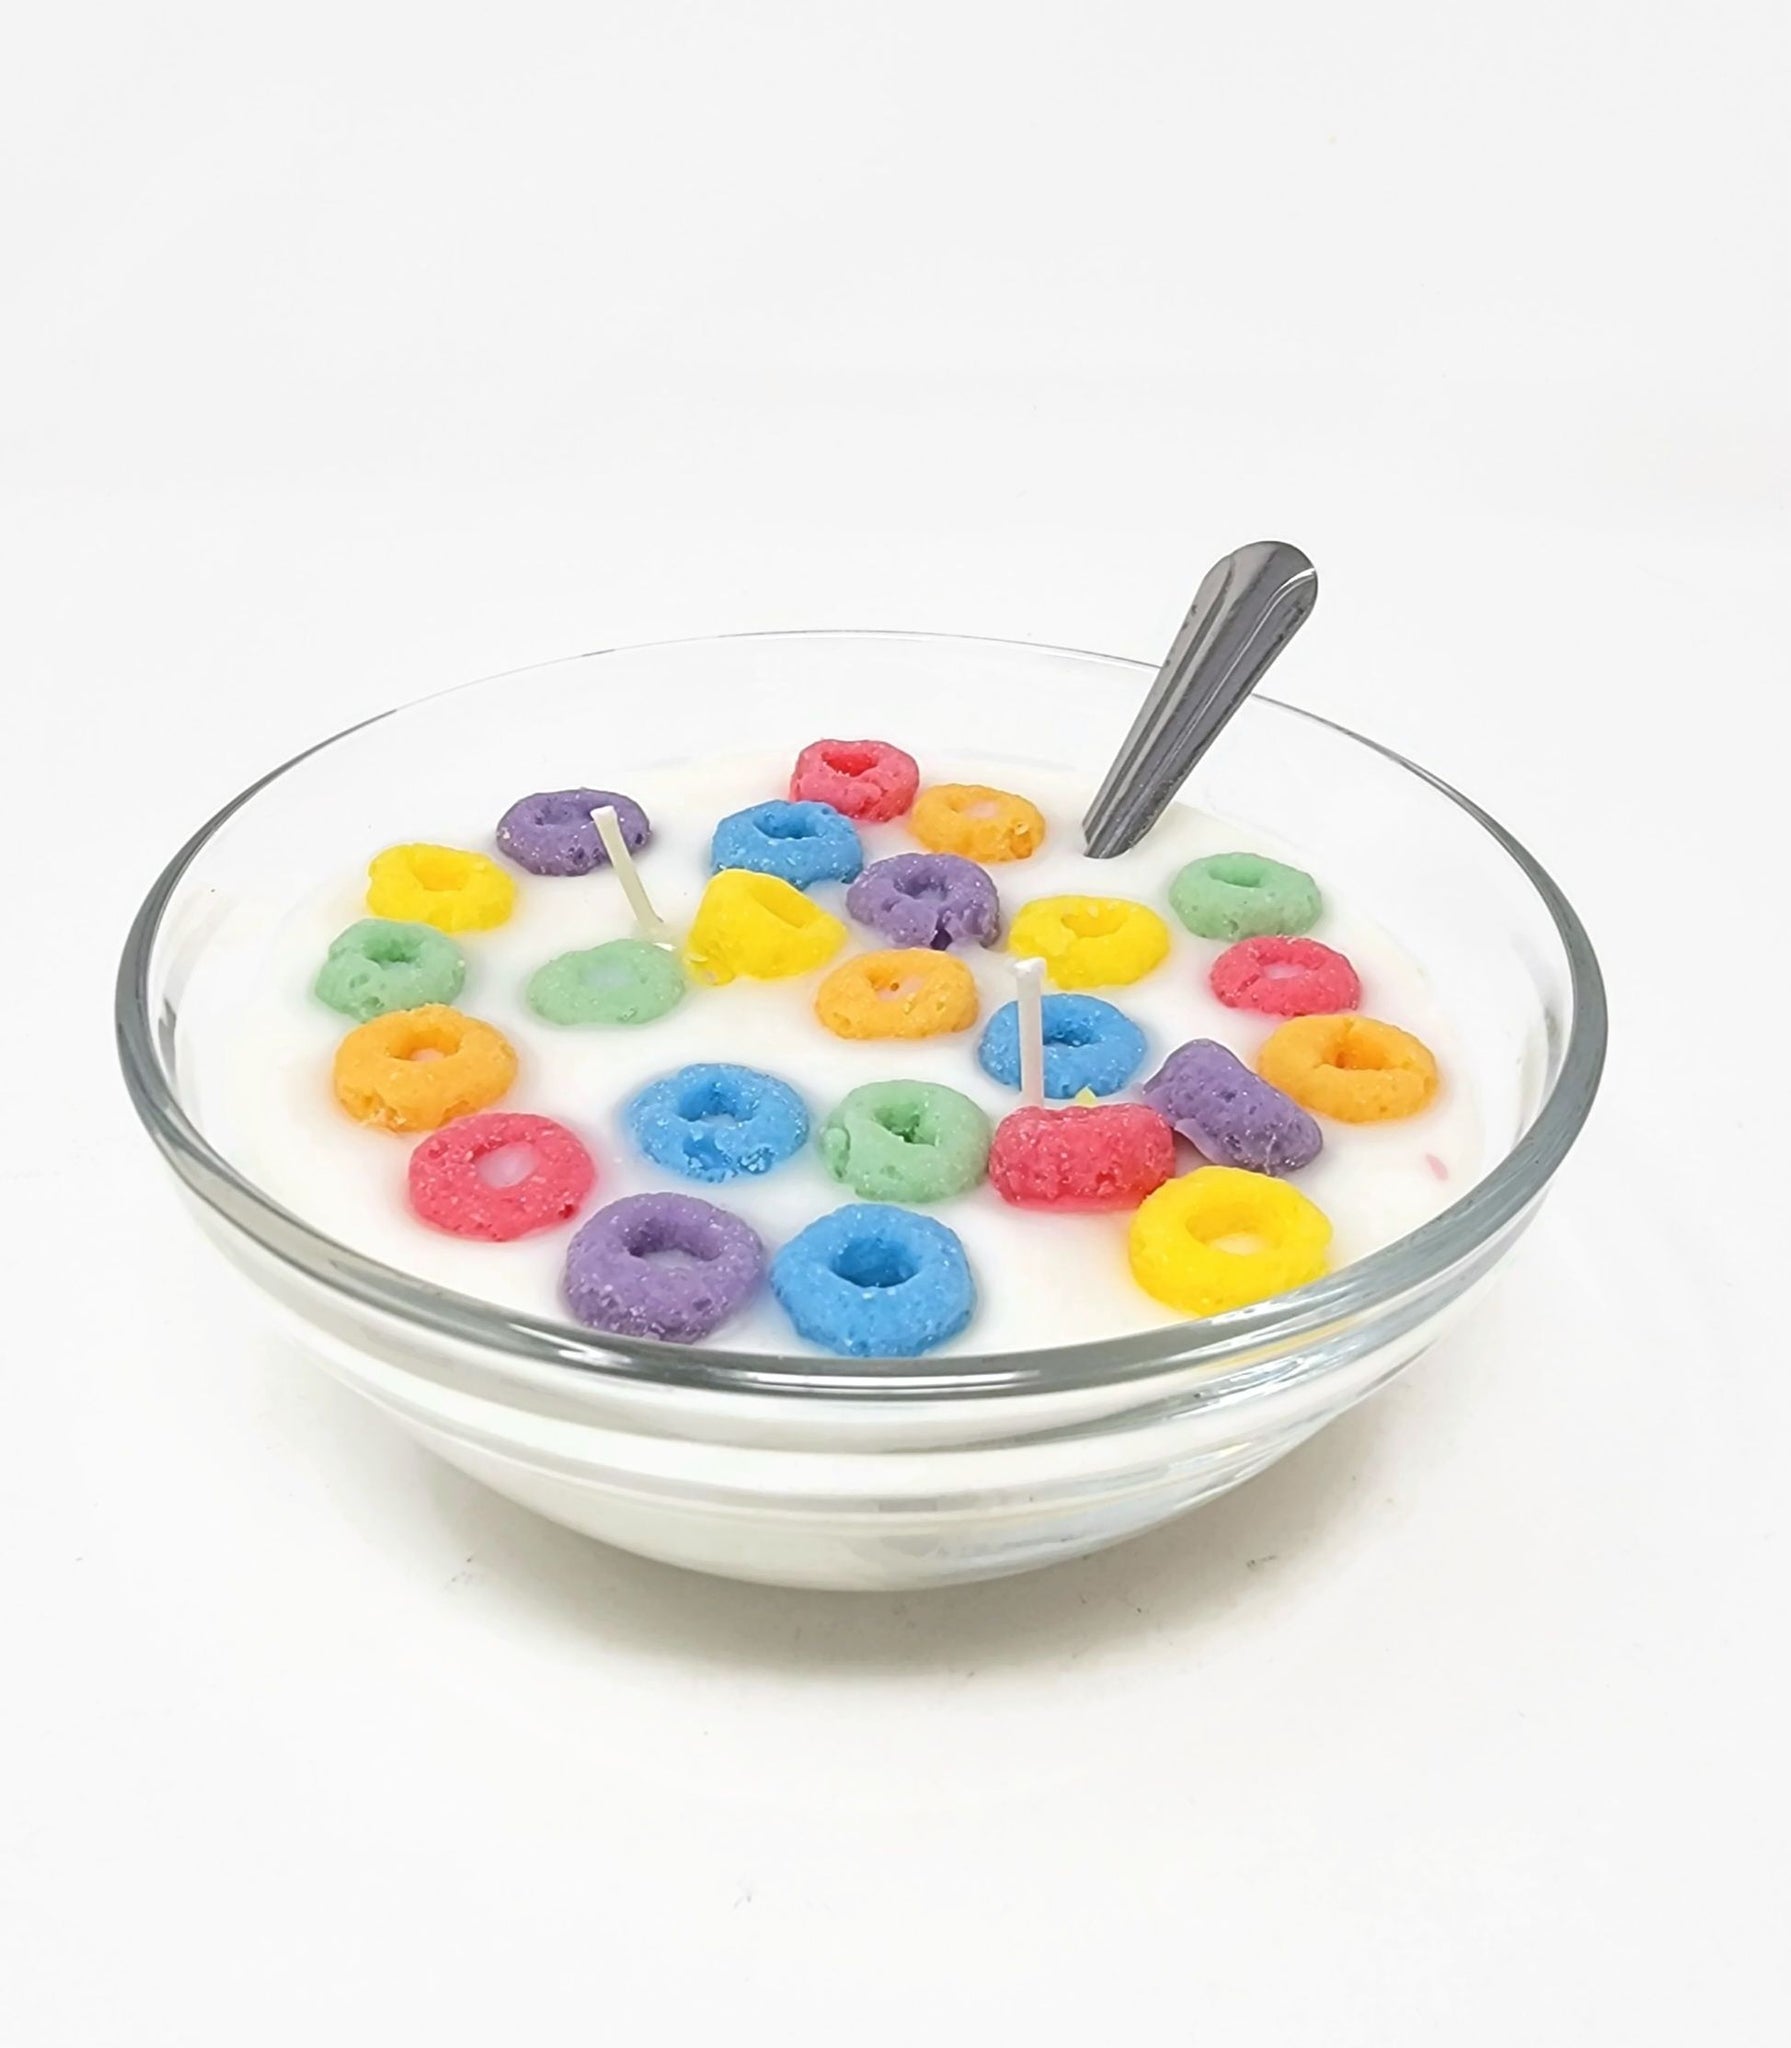 Cereal Candle / Case of 18 / Fruity Loops / Wholesale / Free Shipping